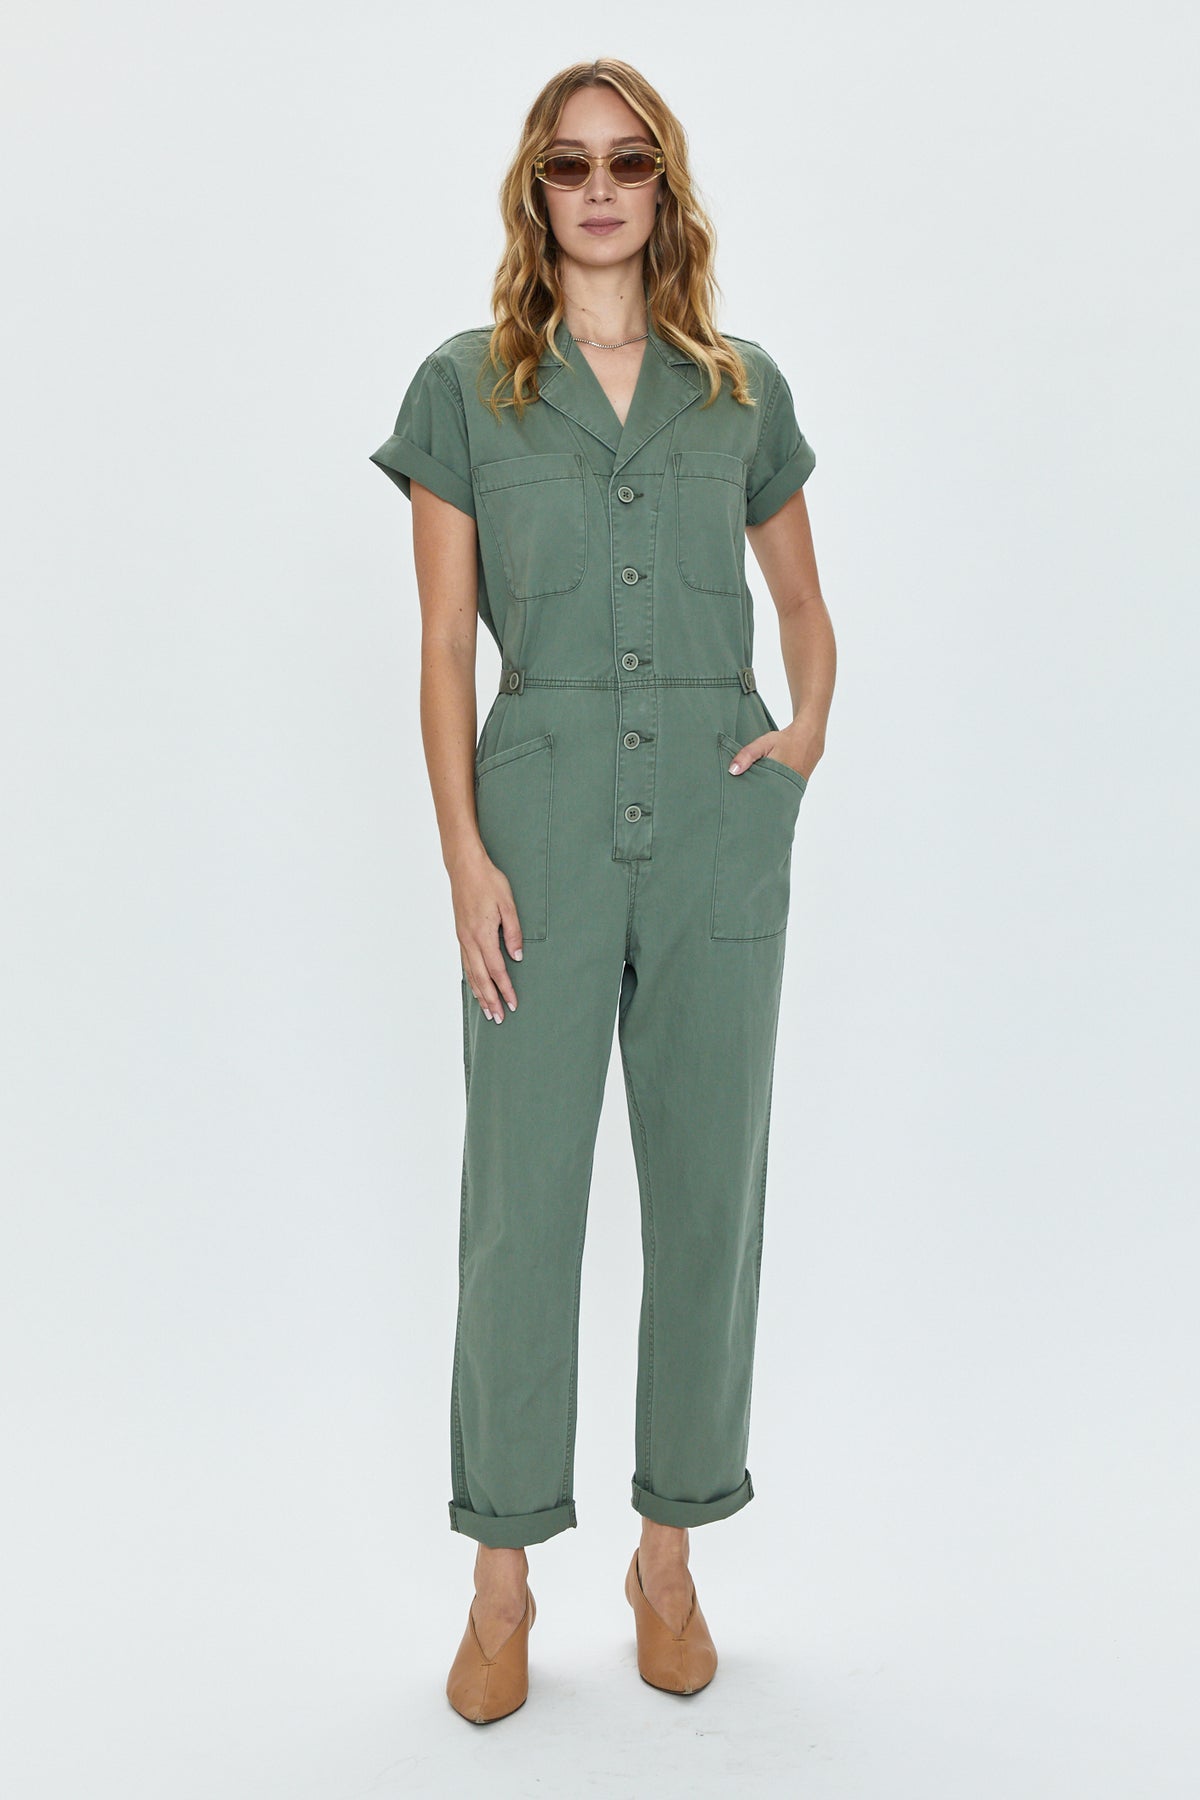 Grover Short Sleeve Field Suit - Colonel